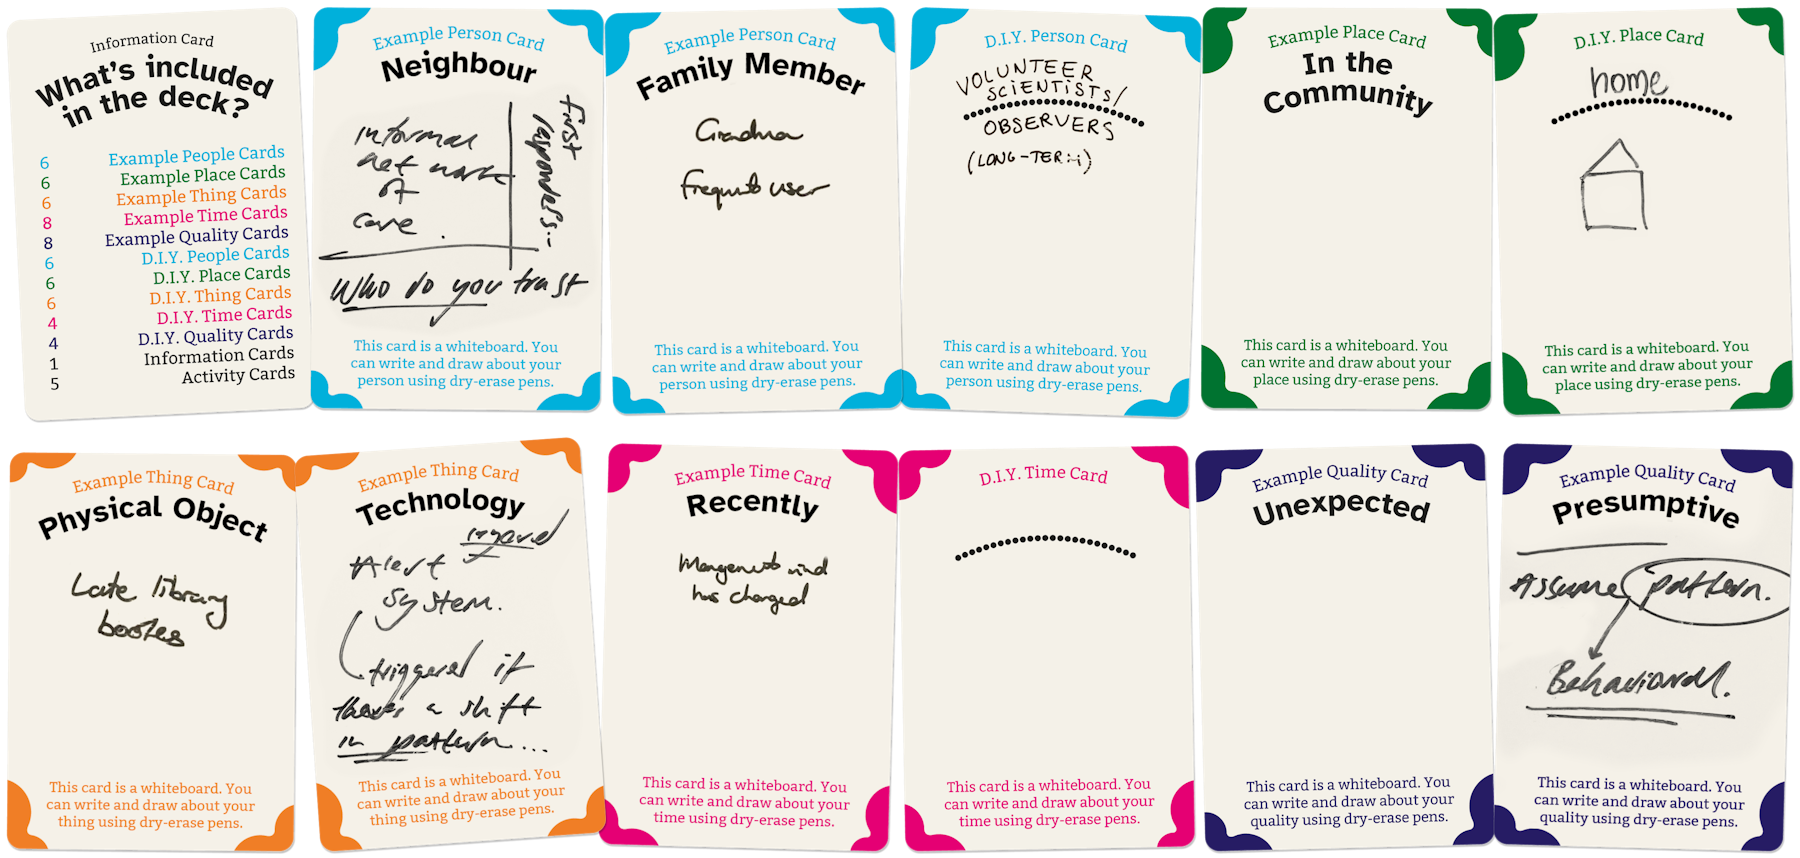 A variety of example and D.I.Y. cards with annotations.